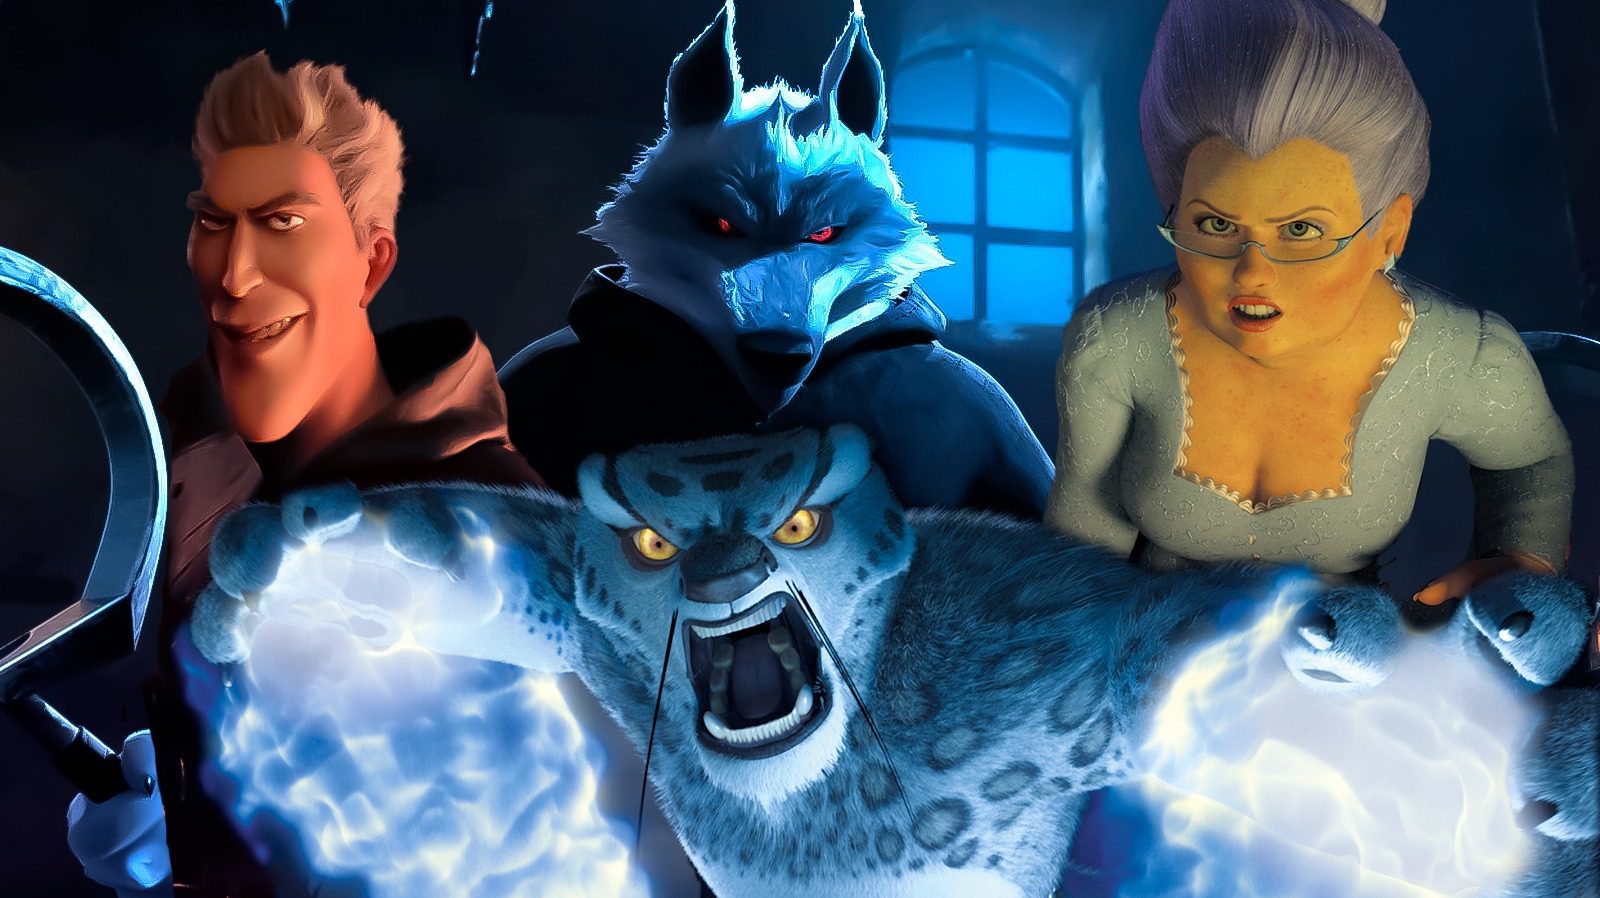 The Best DreamWorks Animated Movie Villains Ranked Worst To Best